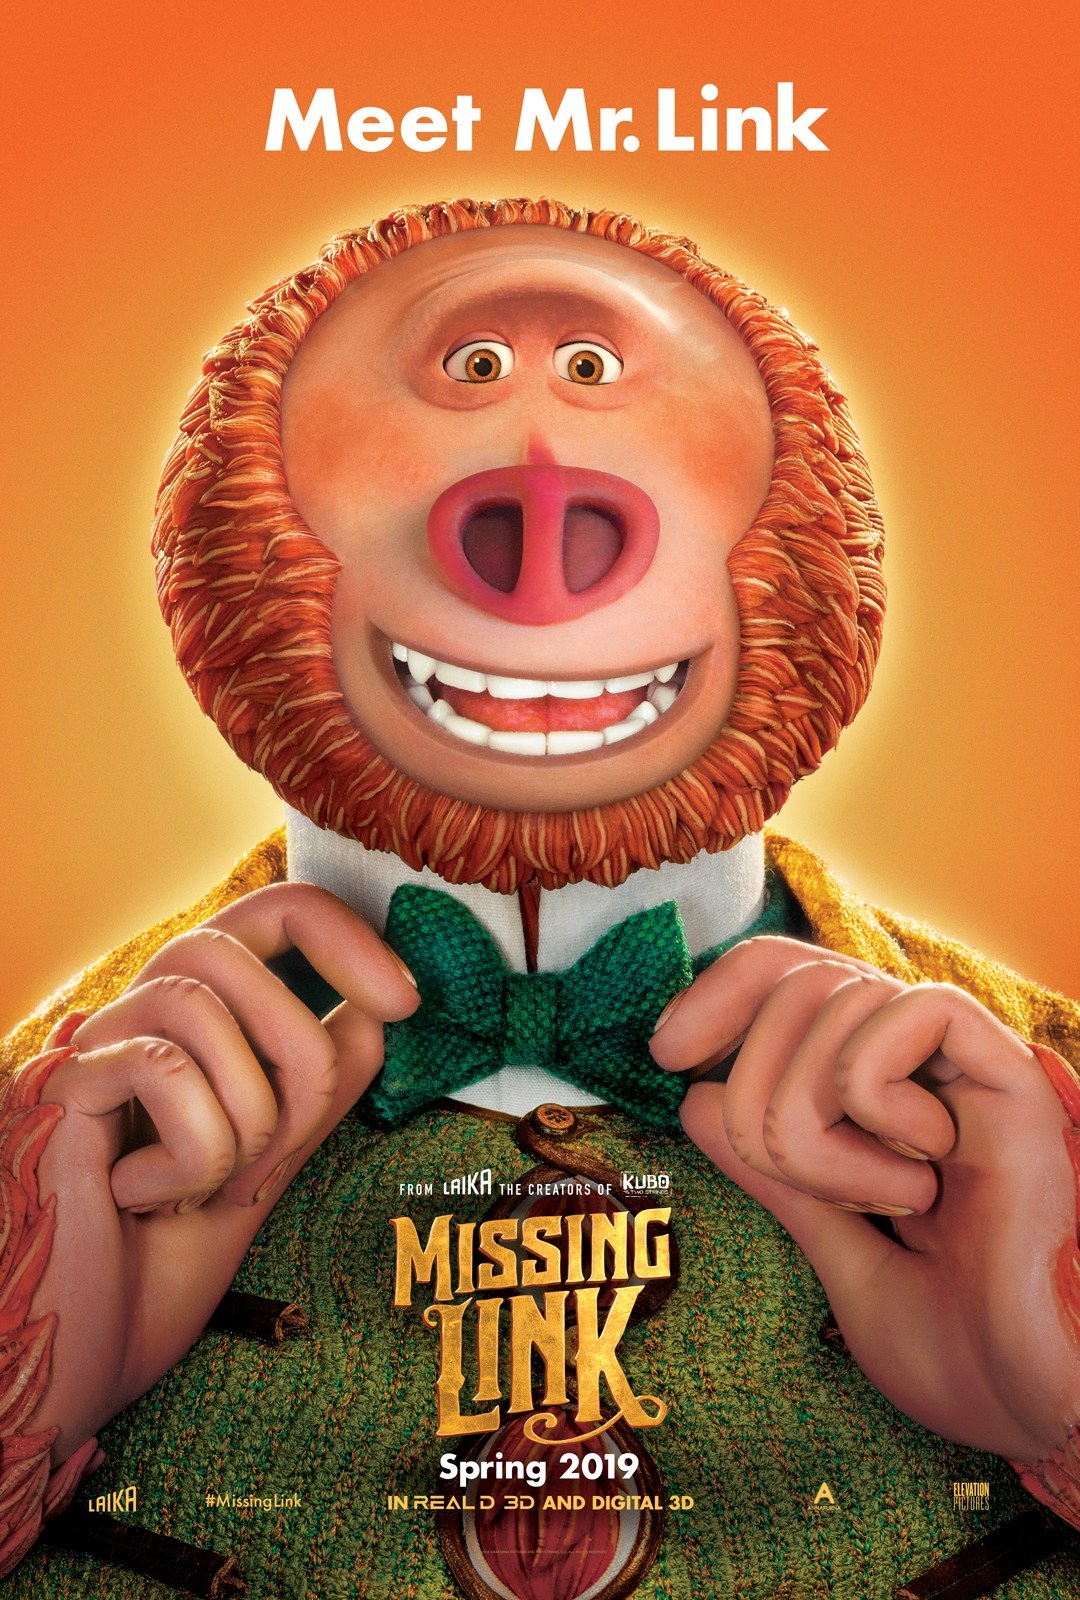 CONTEST: Win Passes to see an Advance Screening of Missing Link